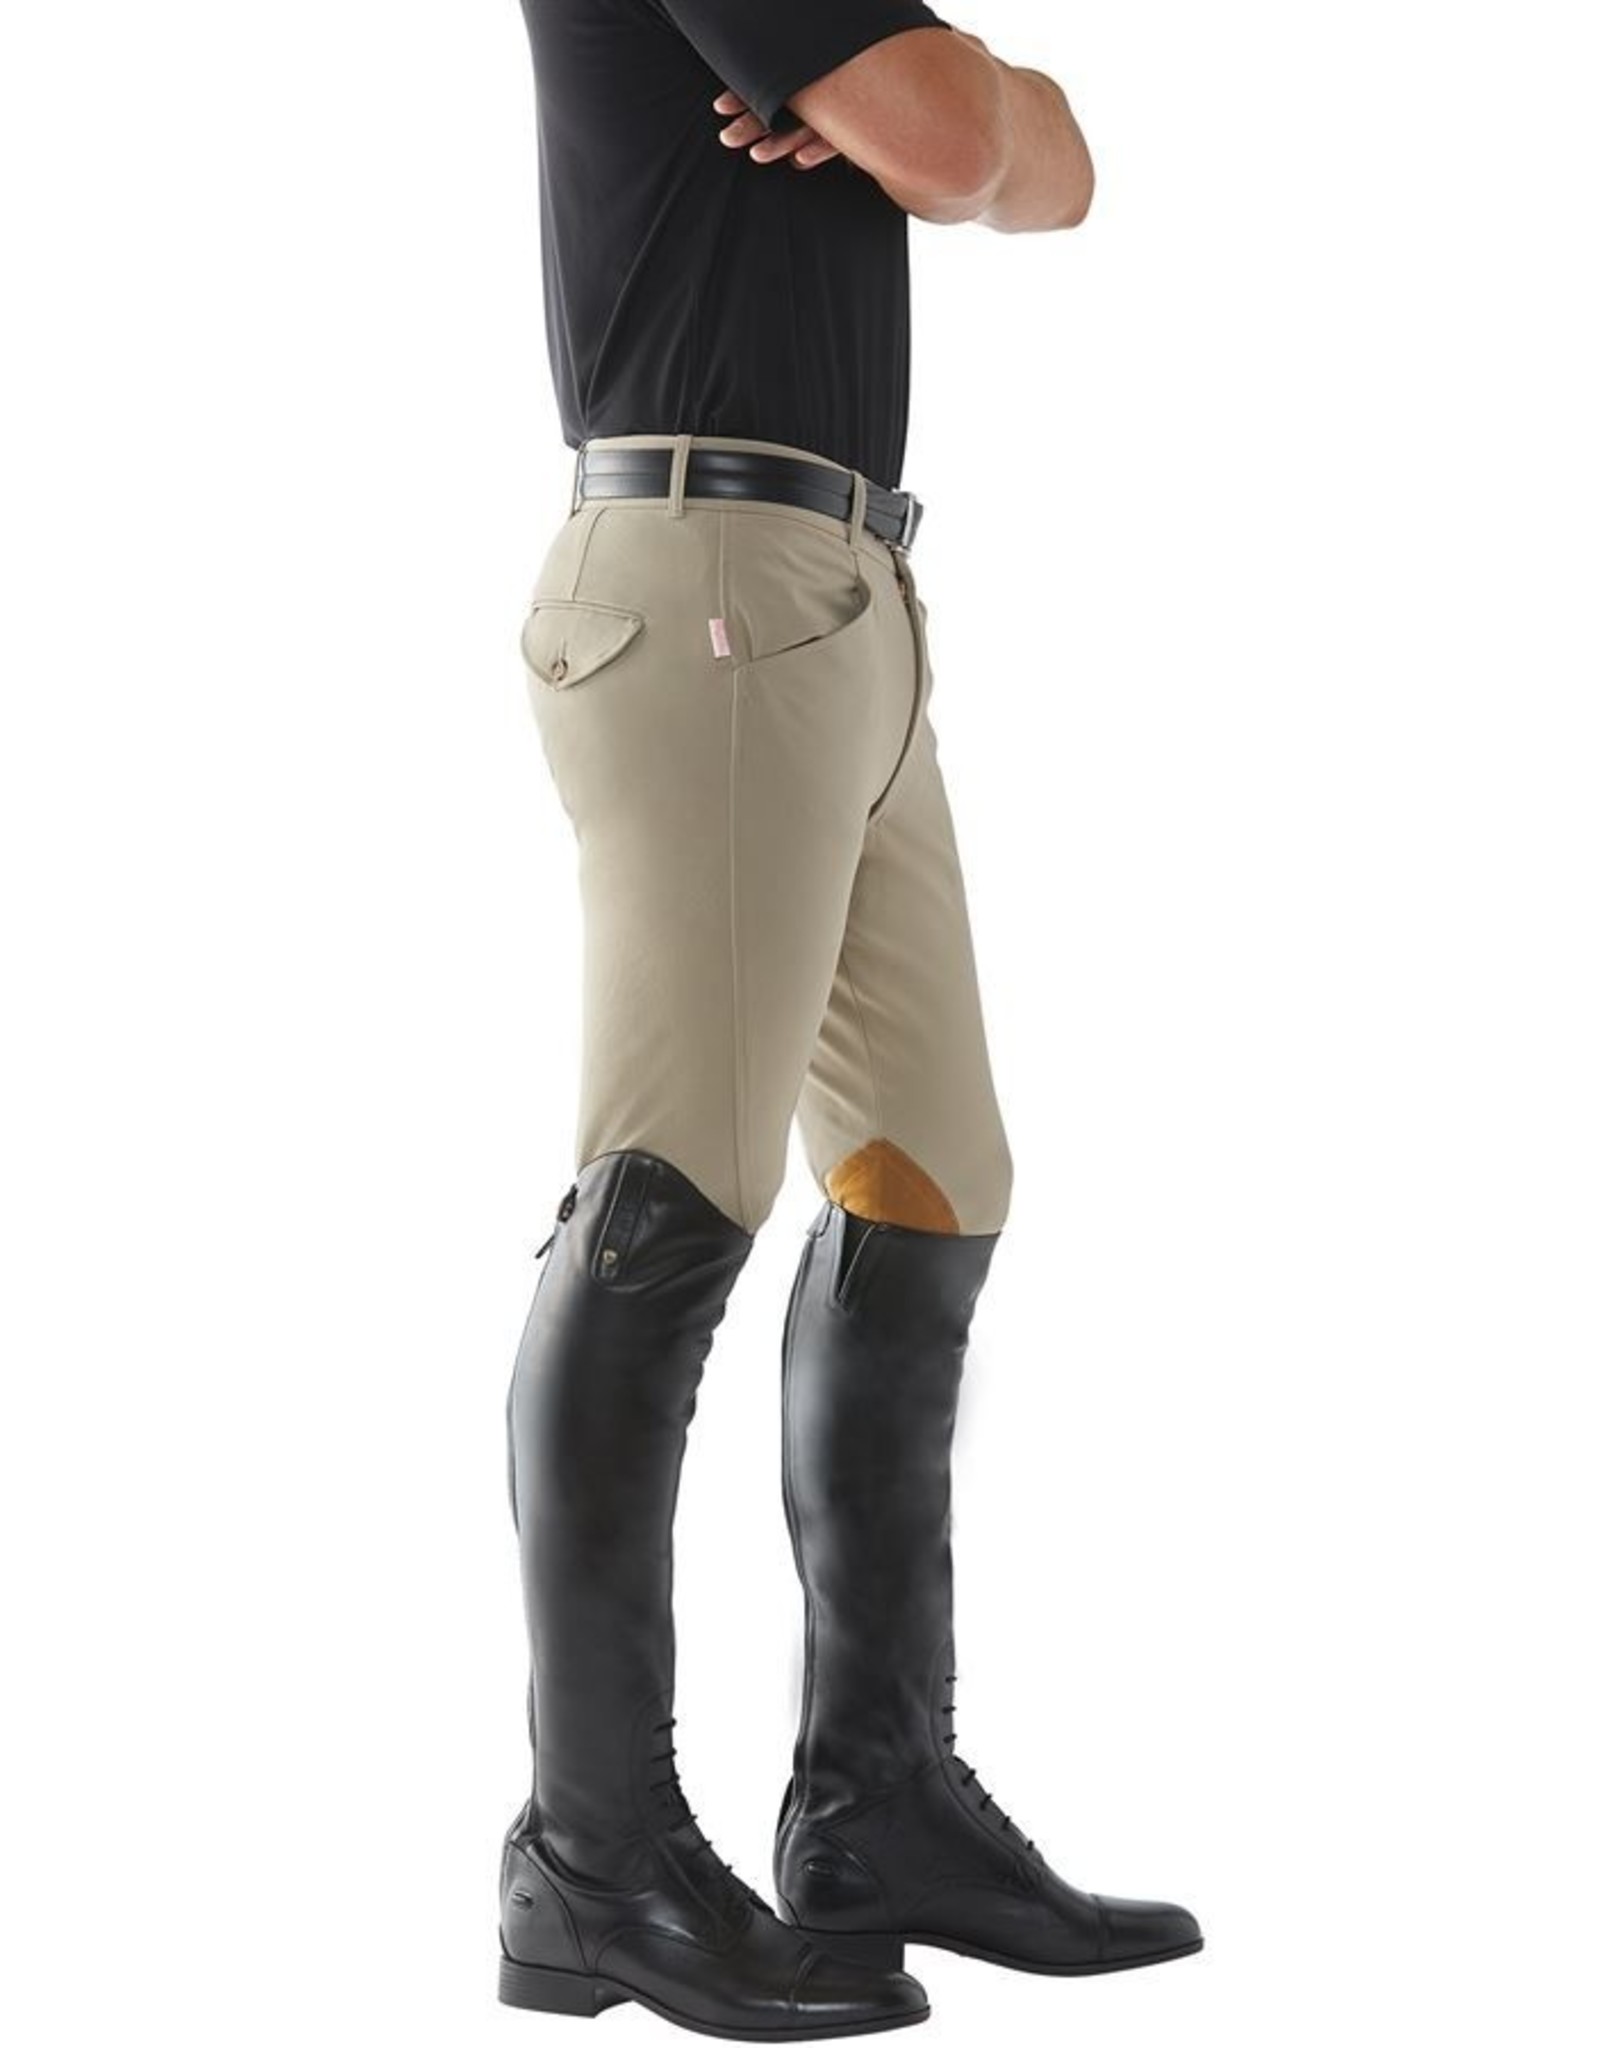 Tailored Sportsman Men's Knee Patch Breeches